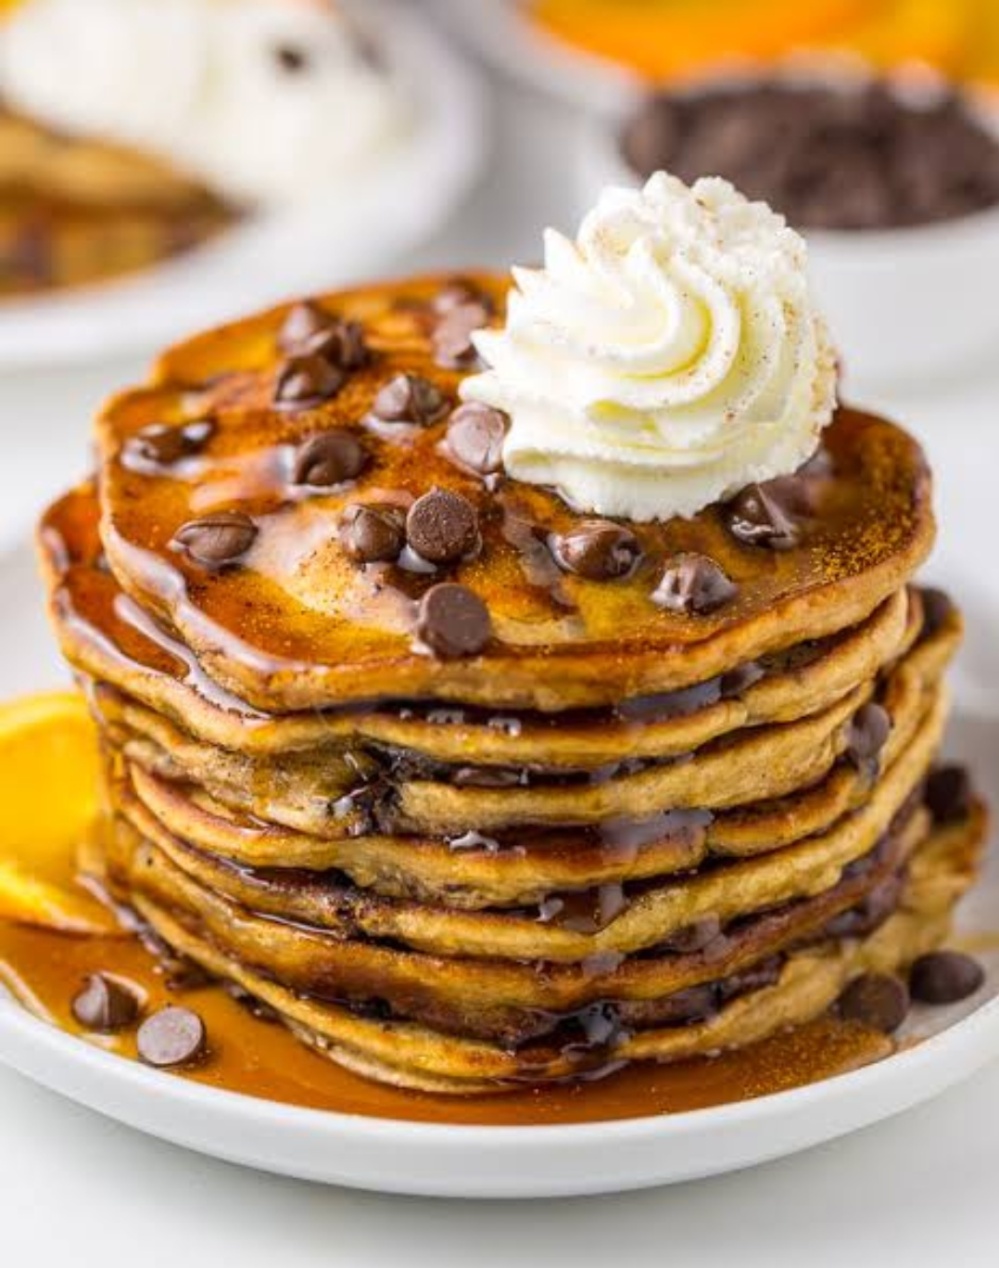 Chocolate chip pancakes with chocolate syrup and maple syrup